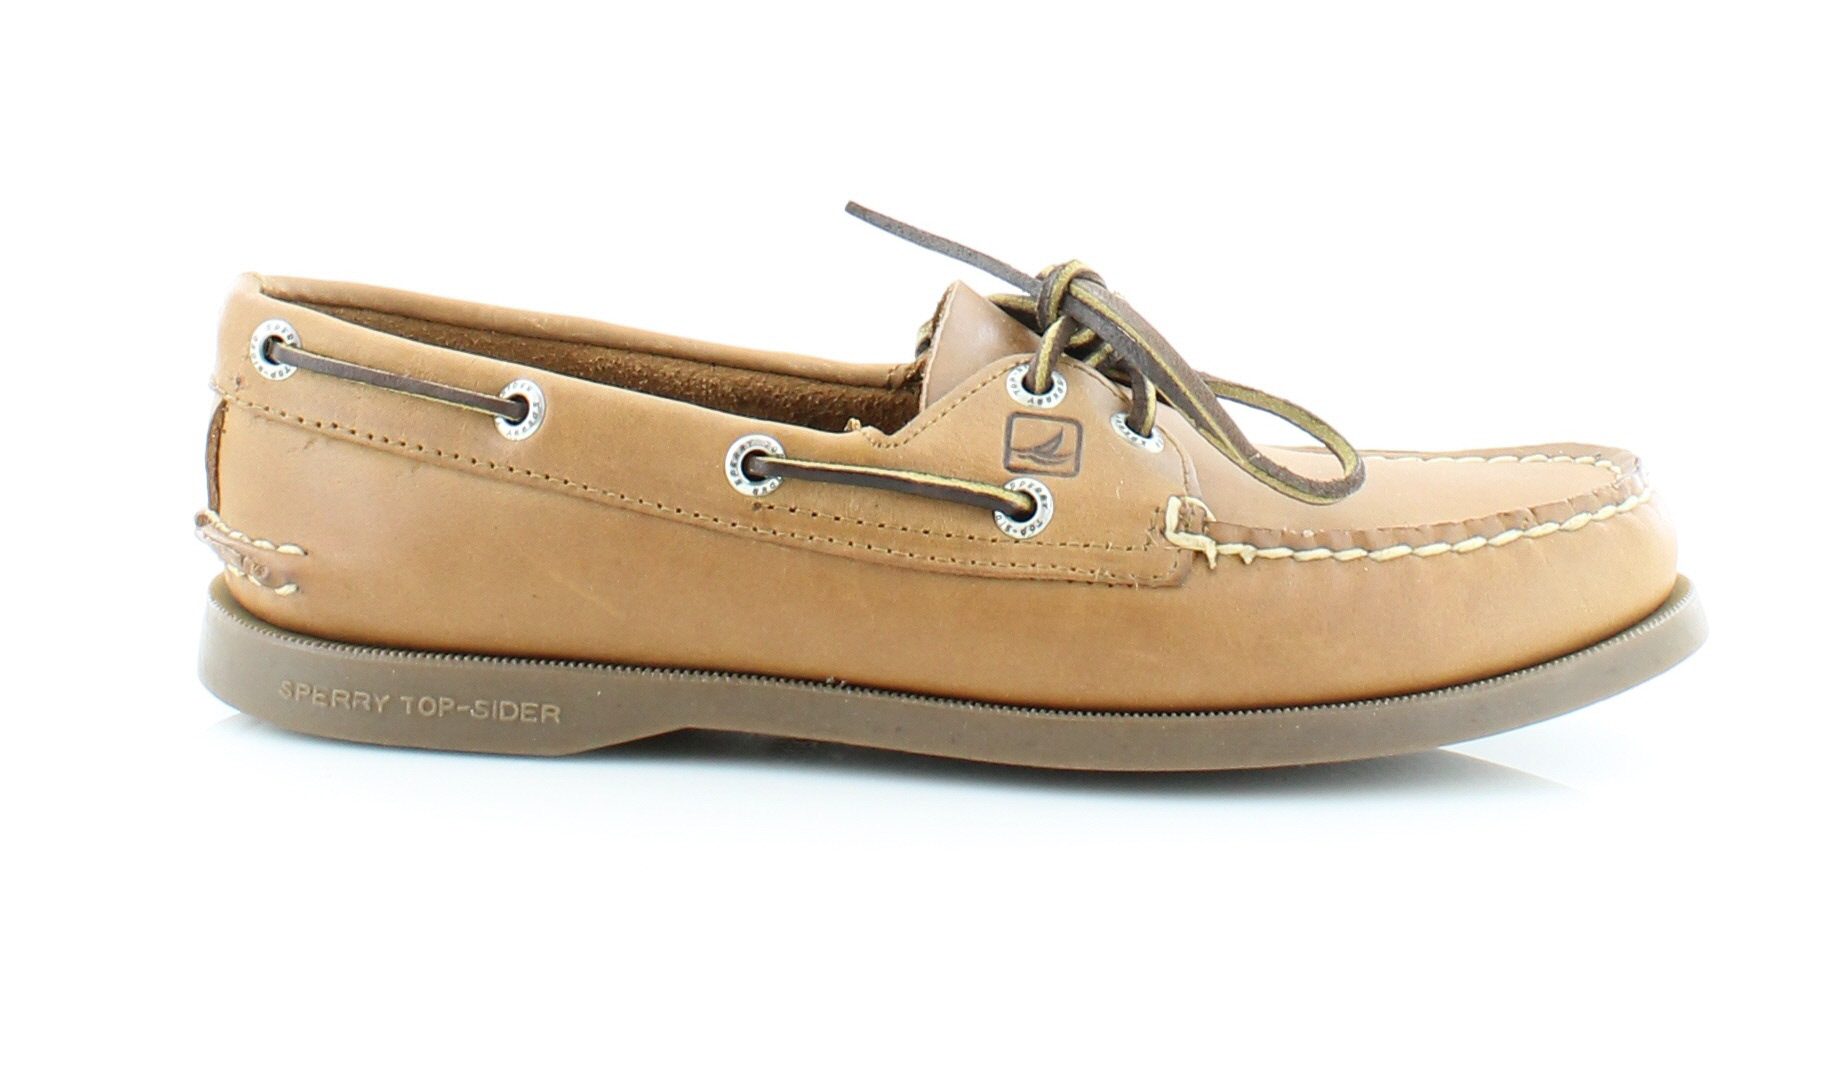 Sperry Top-Sider A/O 2-Eye Women's Loafers & Slip-Ons - image 5 of 5